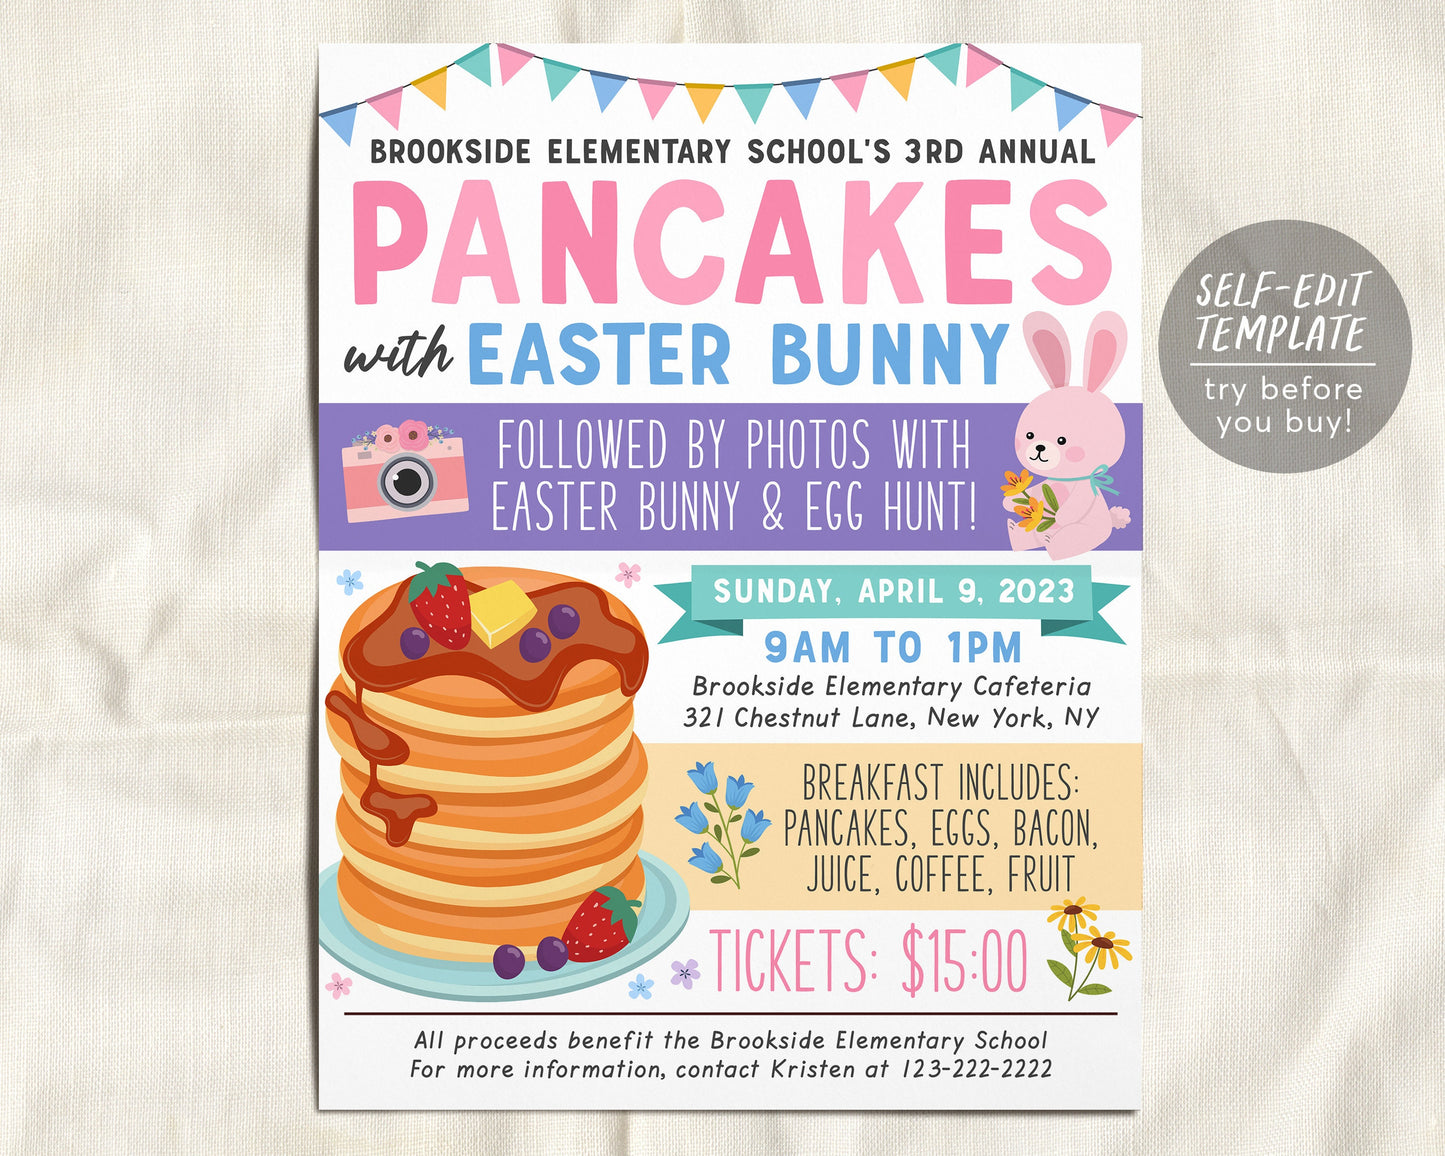 Pancakes with Easter Bunny Flyer Editable Template, Spring Breakfast Brunch Fundraiser Event Poster, School PTO PTA Church Charity Community